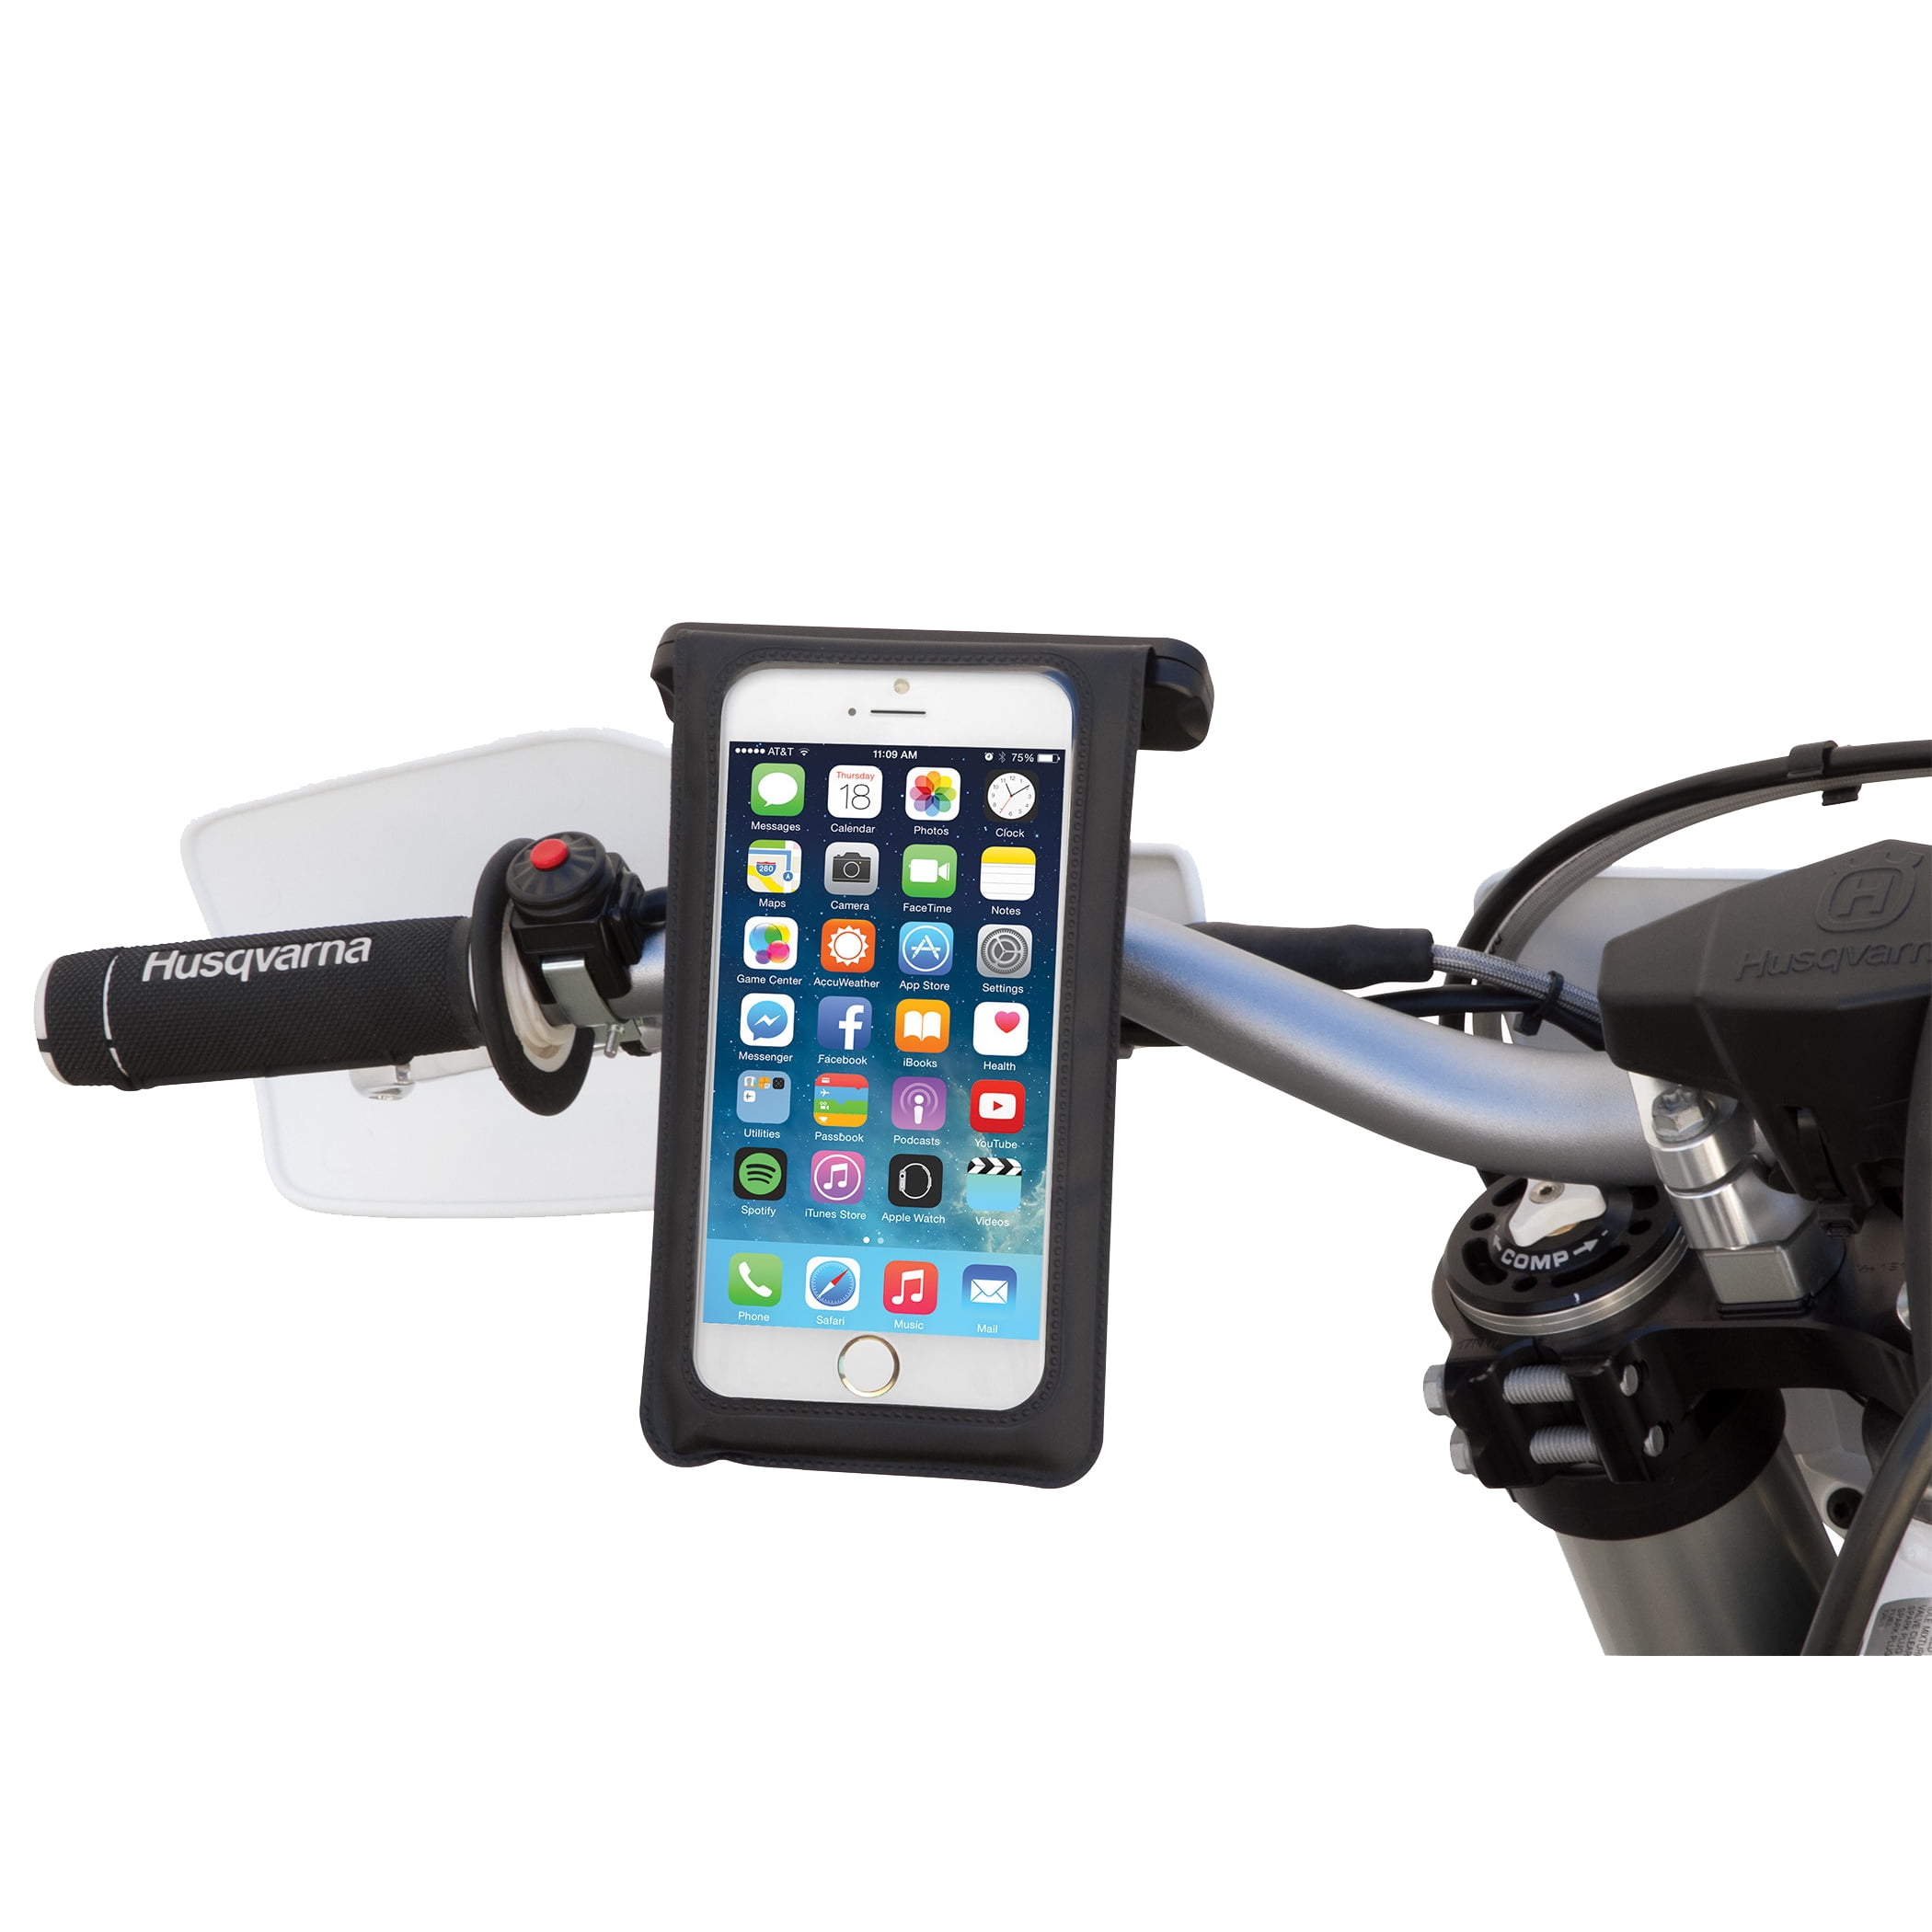 scosche bike mount for mobile devices